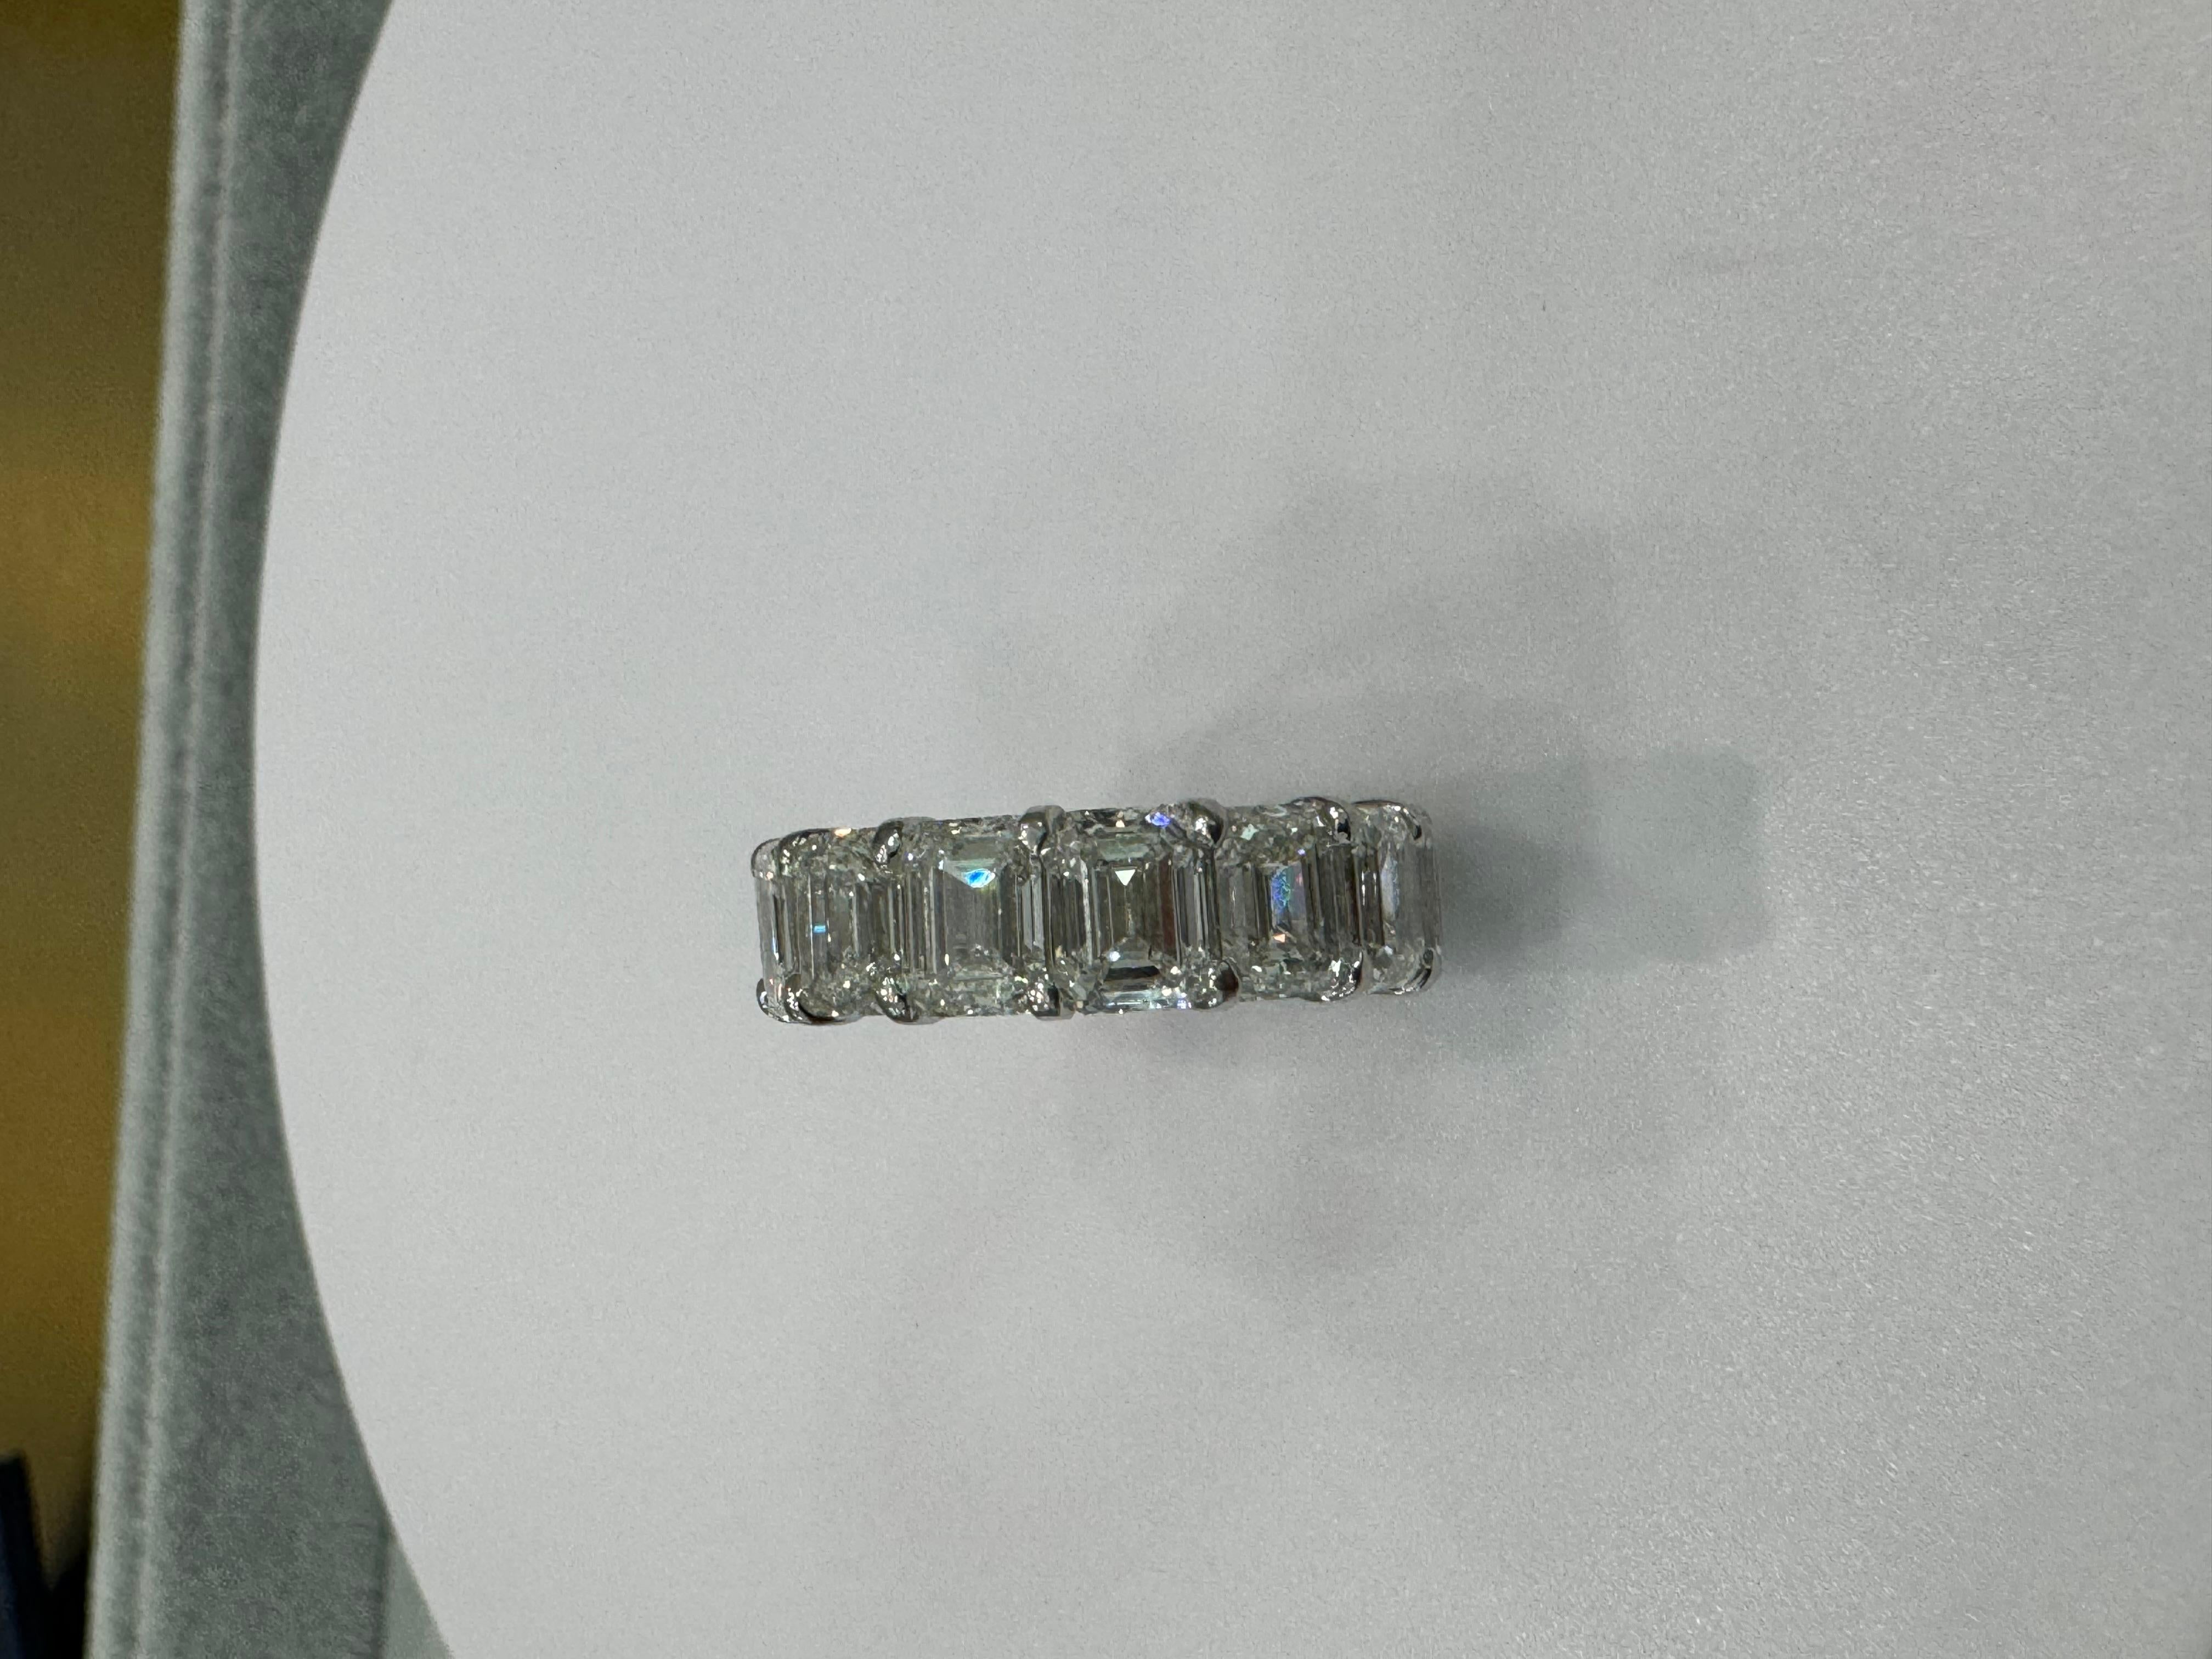 14 Carat Total Weight Eternity Band with Emerald Cut Diamonds
14 stones total Size 5.75
Each Diamond is 1ct Each and Individually GIA Certified G/H Color VS-SI1 Clarity
Stunning Eternity Band with Certified Natural Diamonds in Platinum Share Prong